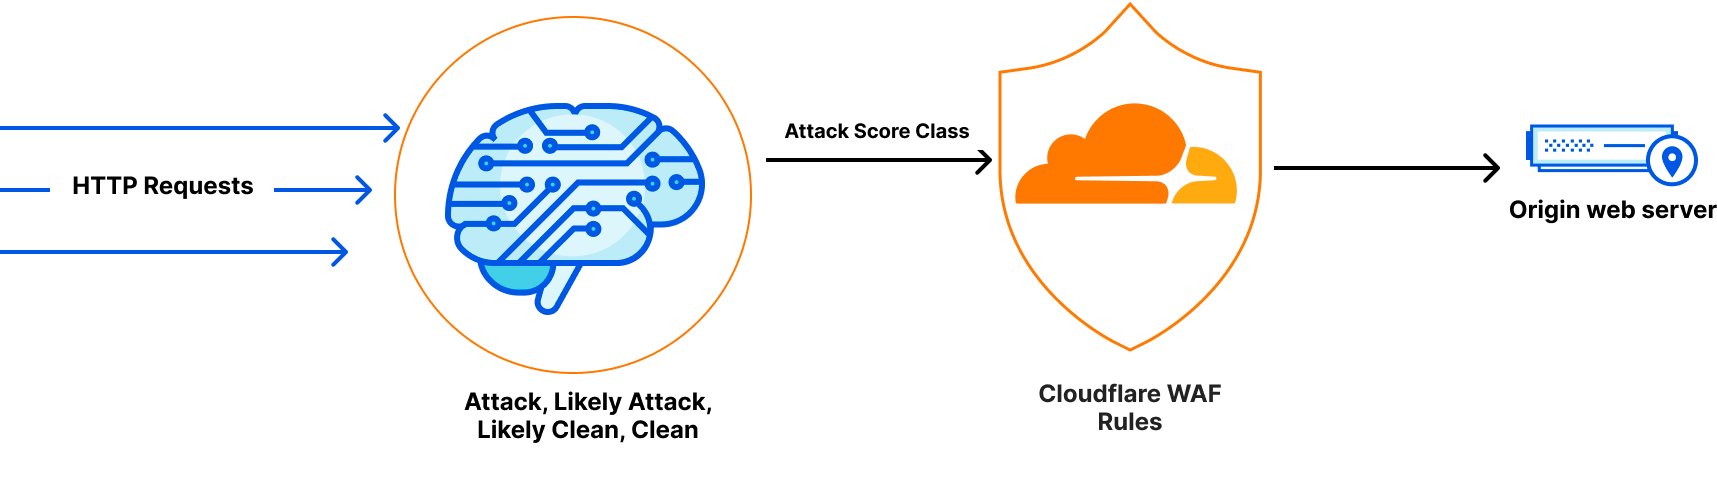 Diagram visualizing the machine learning model classification of HTTP requests, passing Attack Score Class field to the WAF